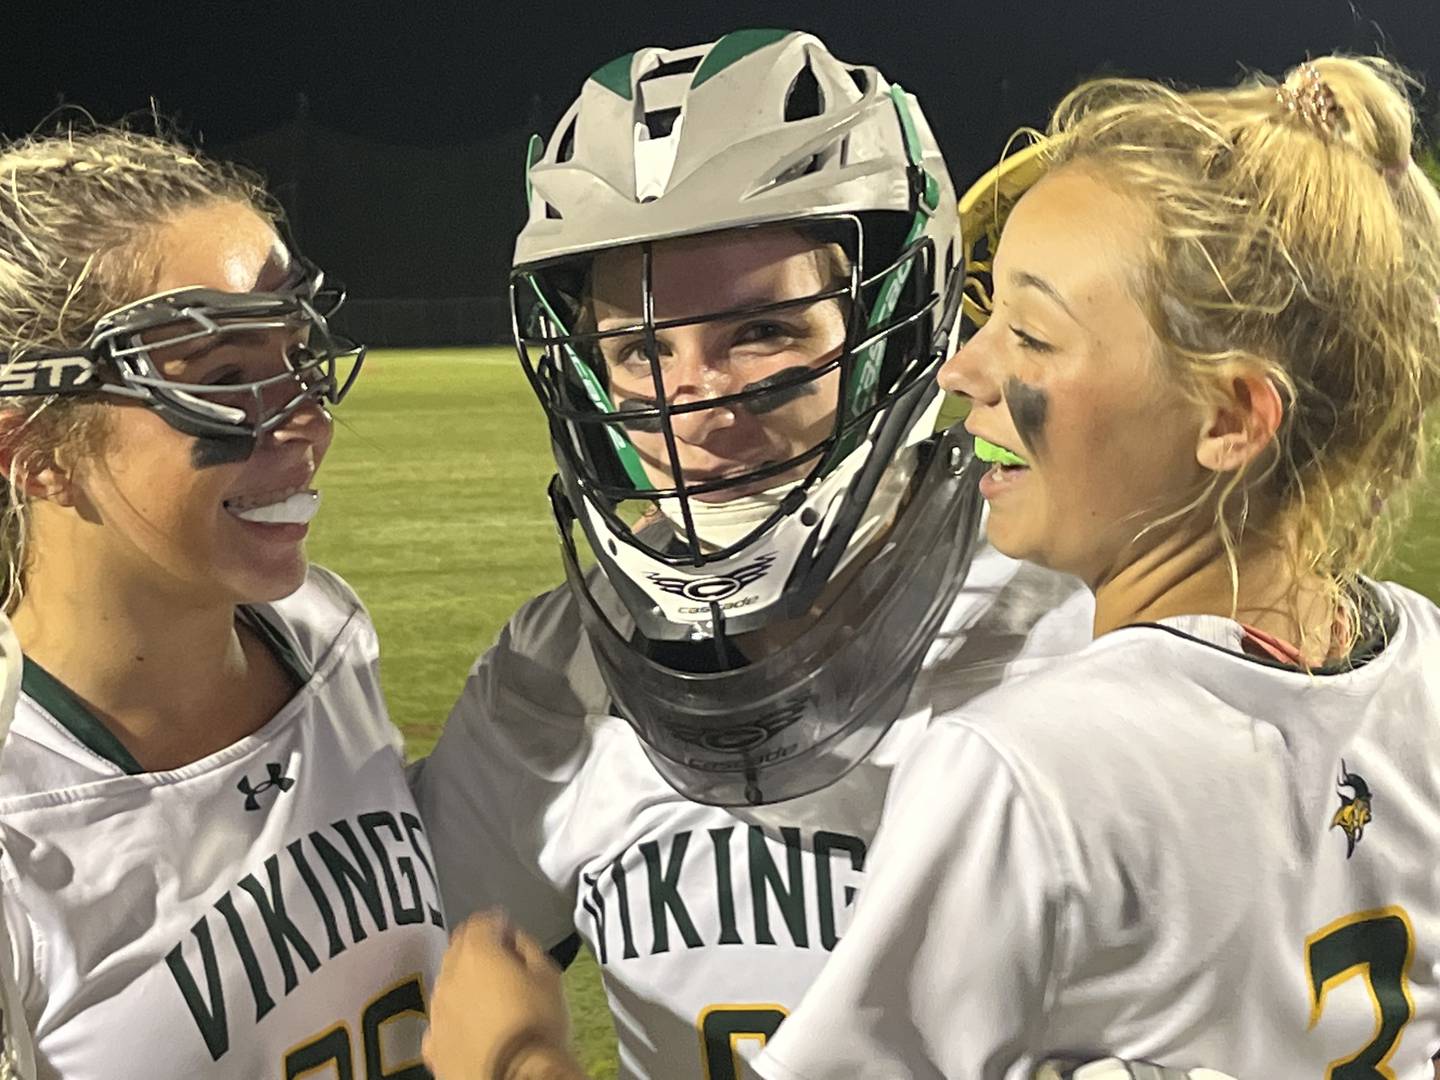 St. John's Catholic's Addison Scanlon (left) and Juliana Workman is congratulated by teammate Rylan Piccolo after Saturday evening's IAAM B Conference lacrosse championship game. Scanlon's free position score with about two minutes left in overtime gave the Vikings a 11-10 victory over Park at USA Lacrosse's Tierney Field.